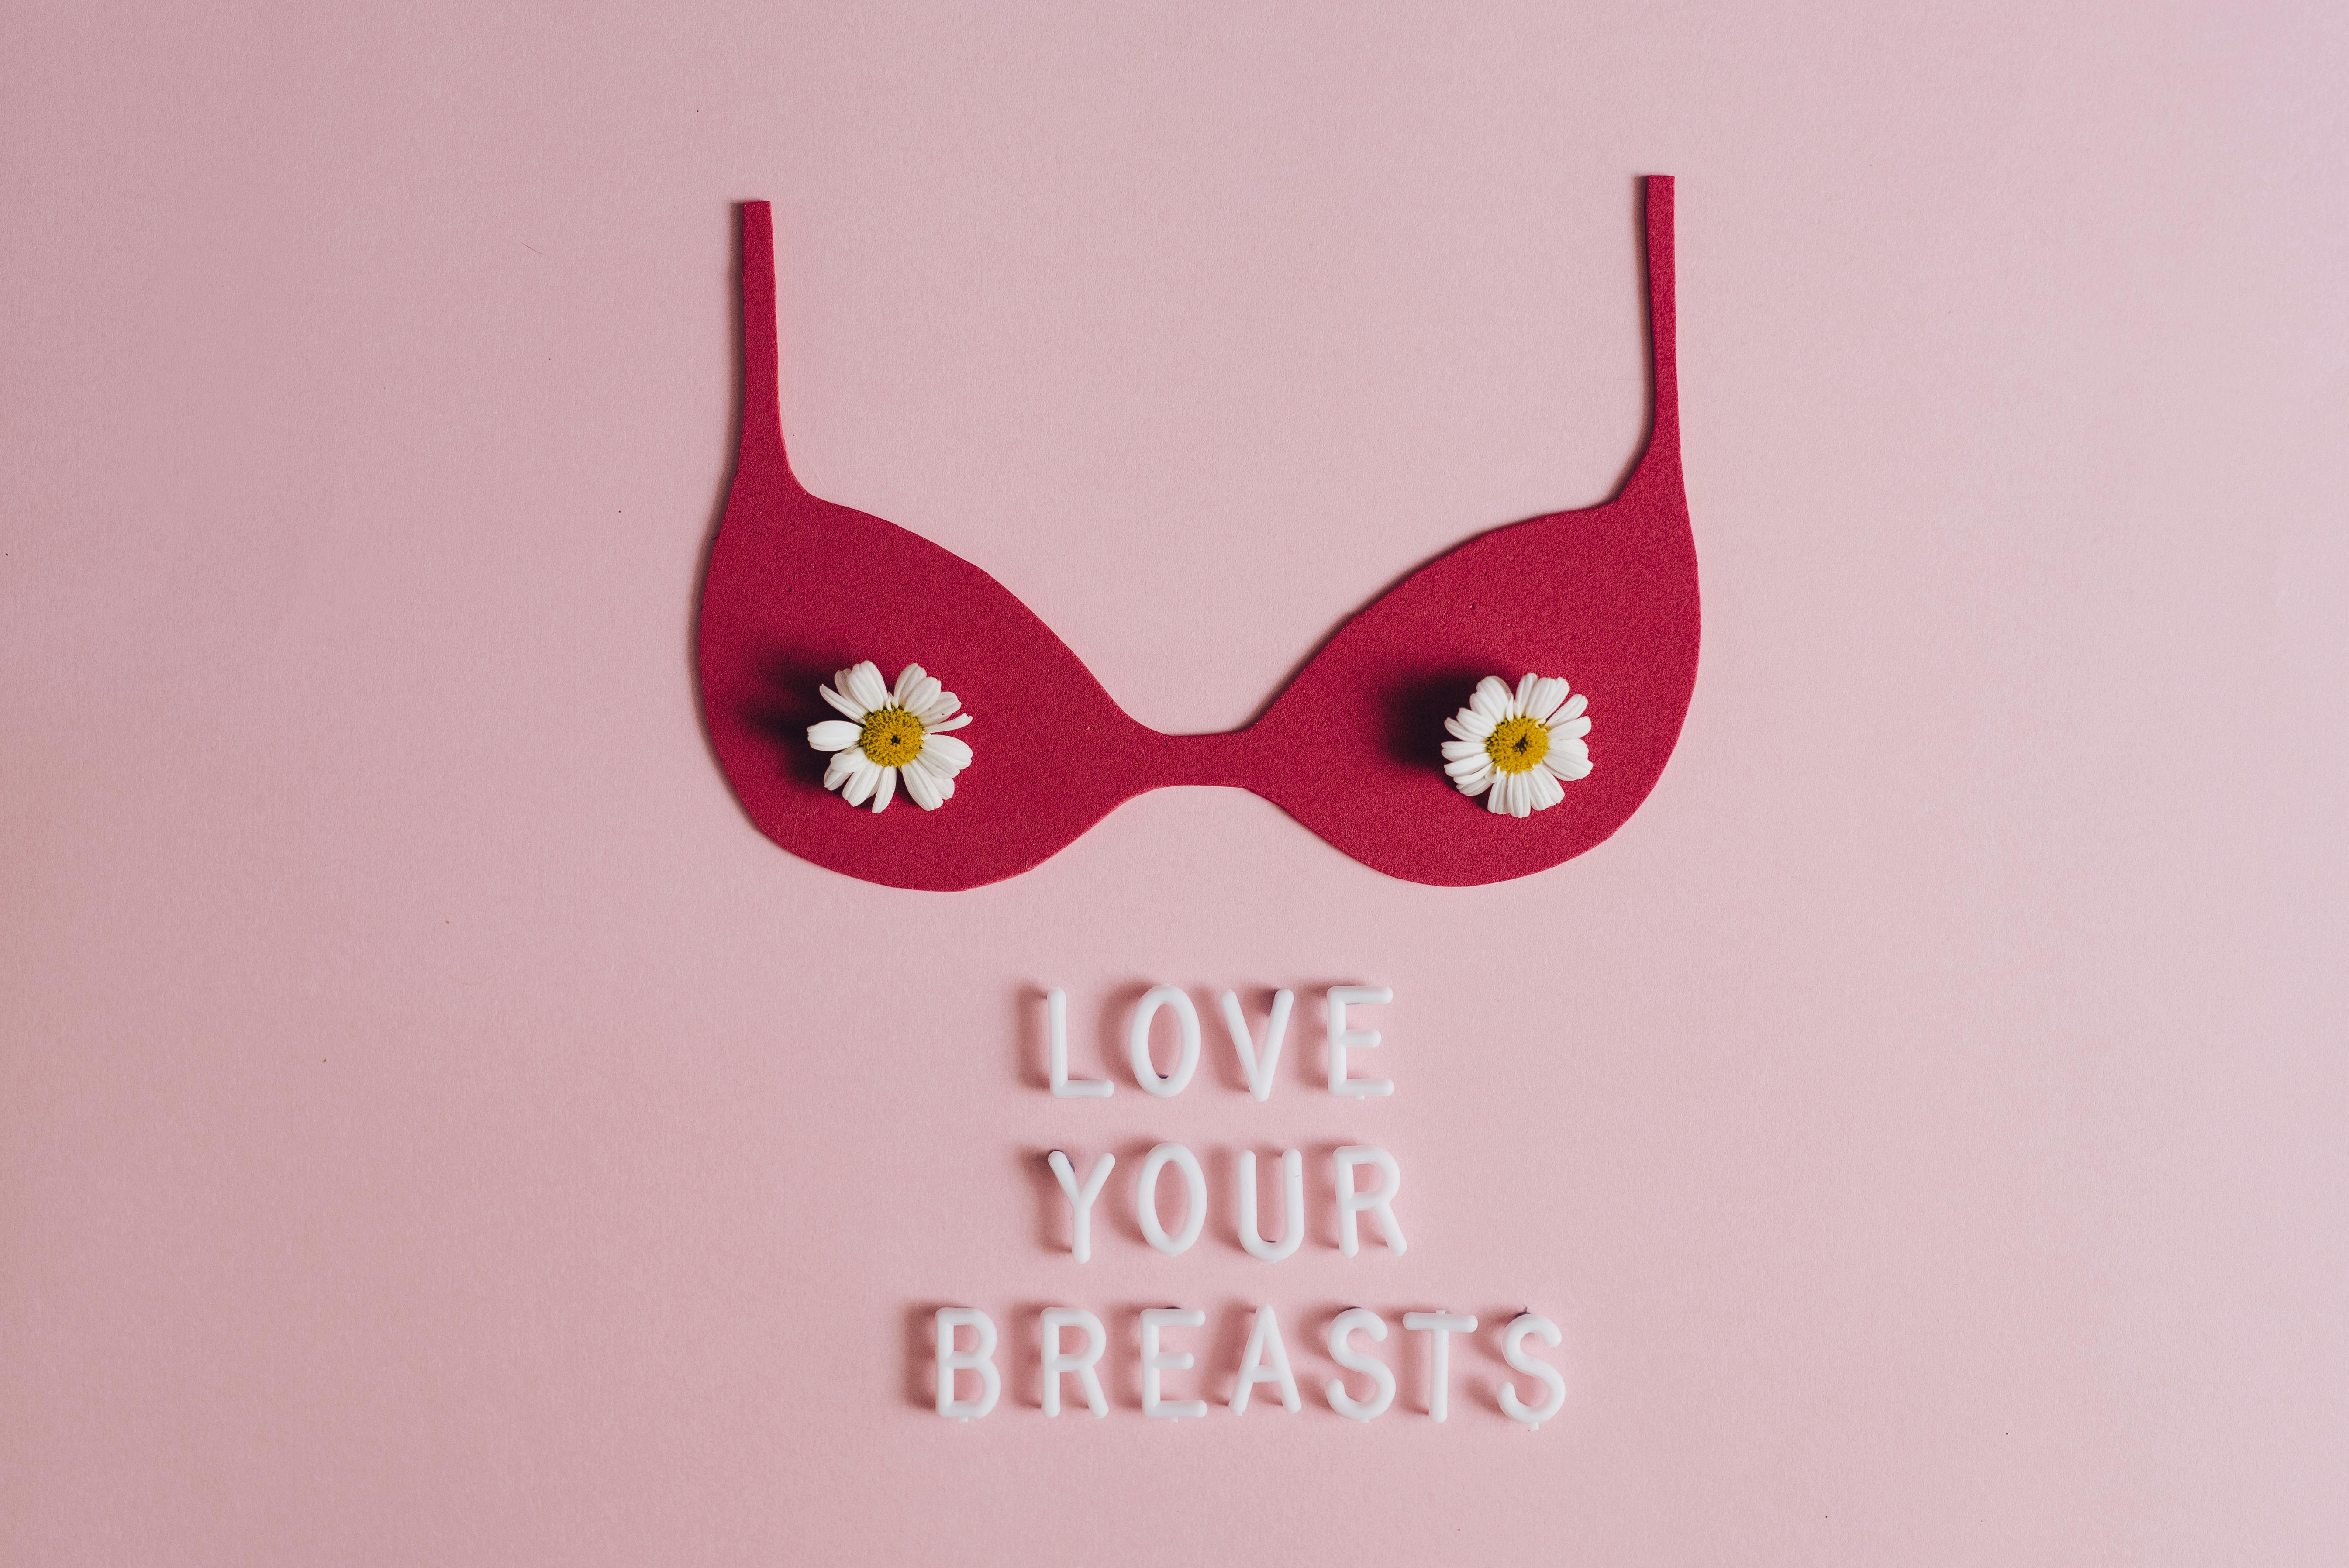 A Brassiere Cutout on a Pink Surface · Free Stock Photo